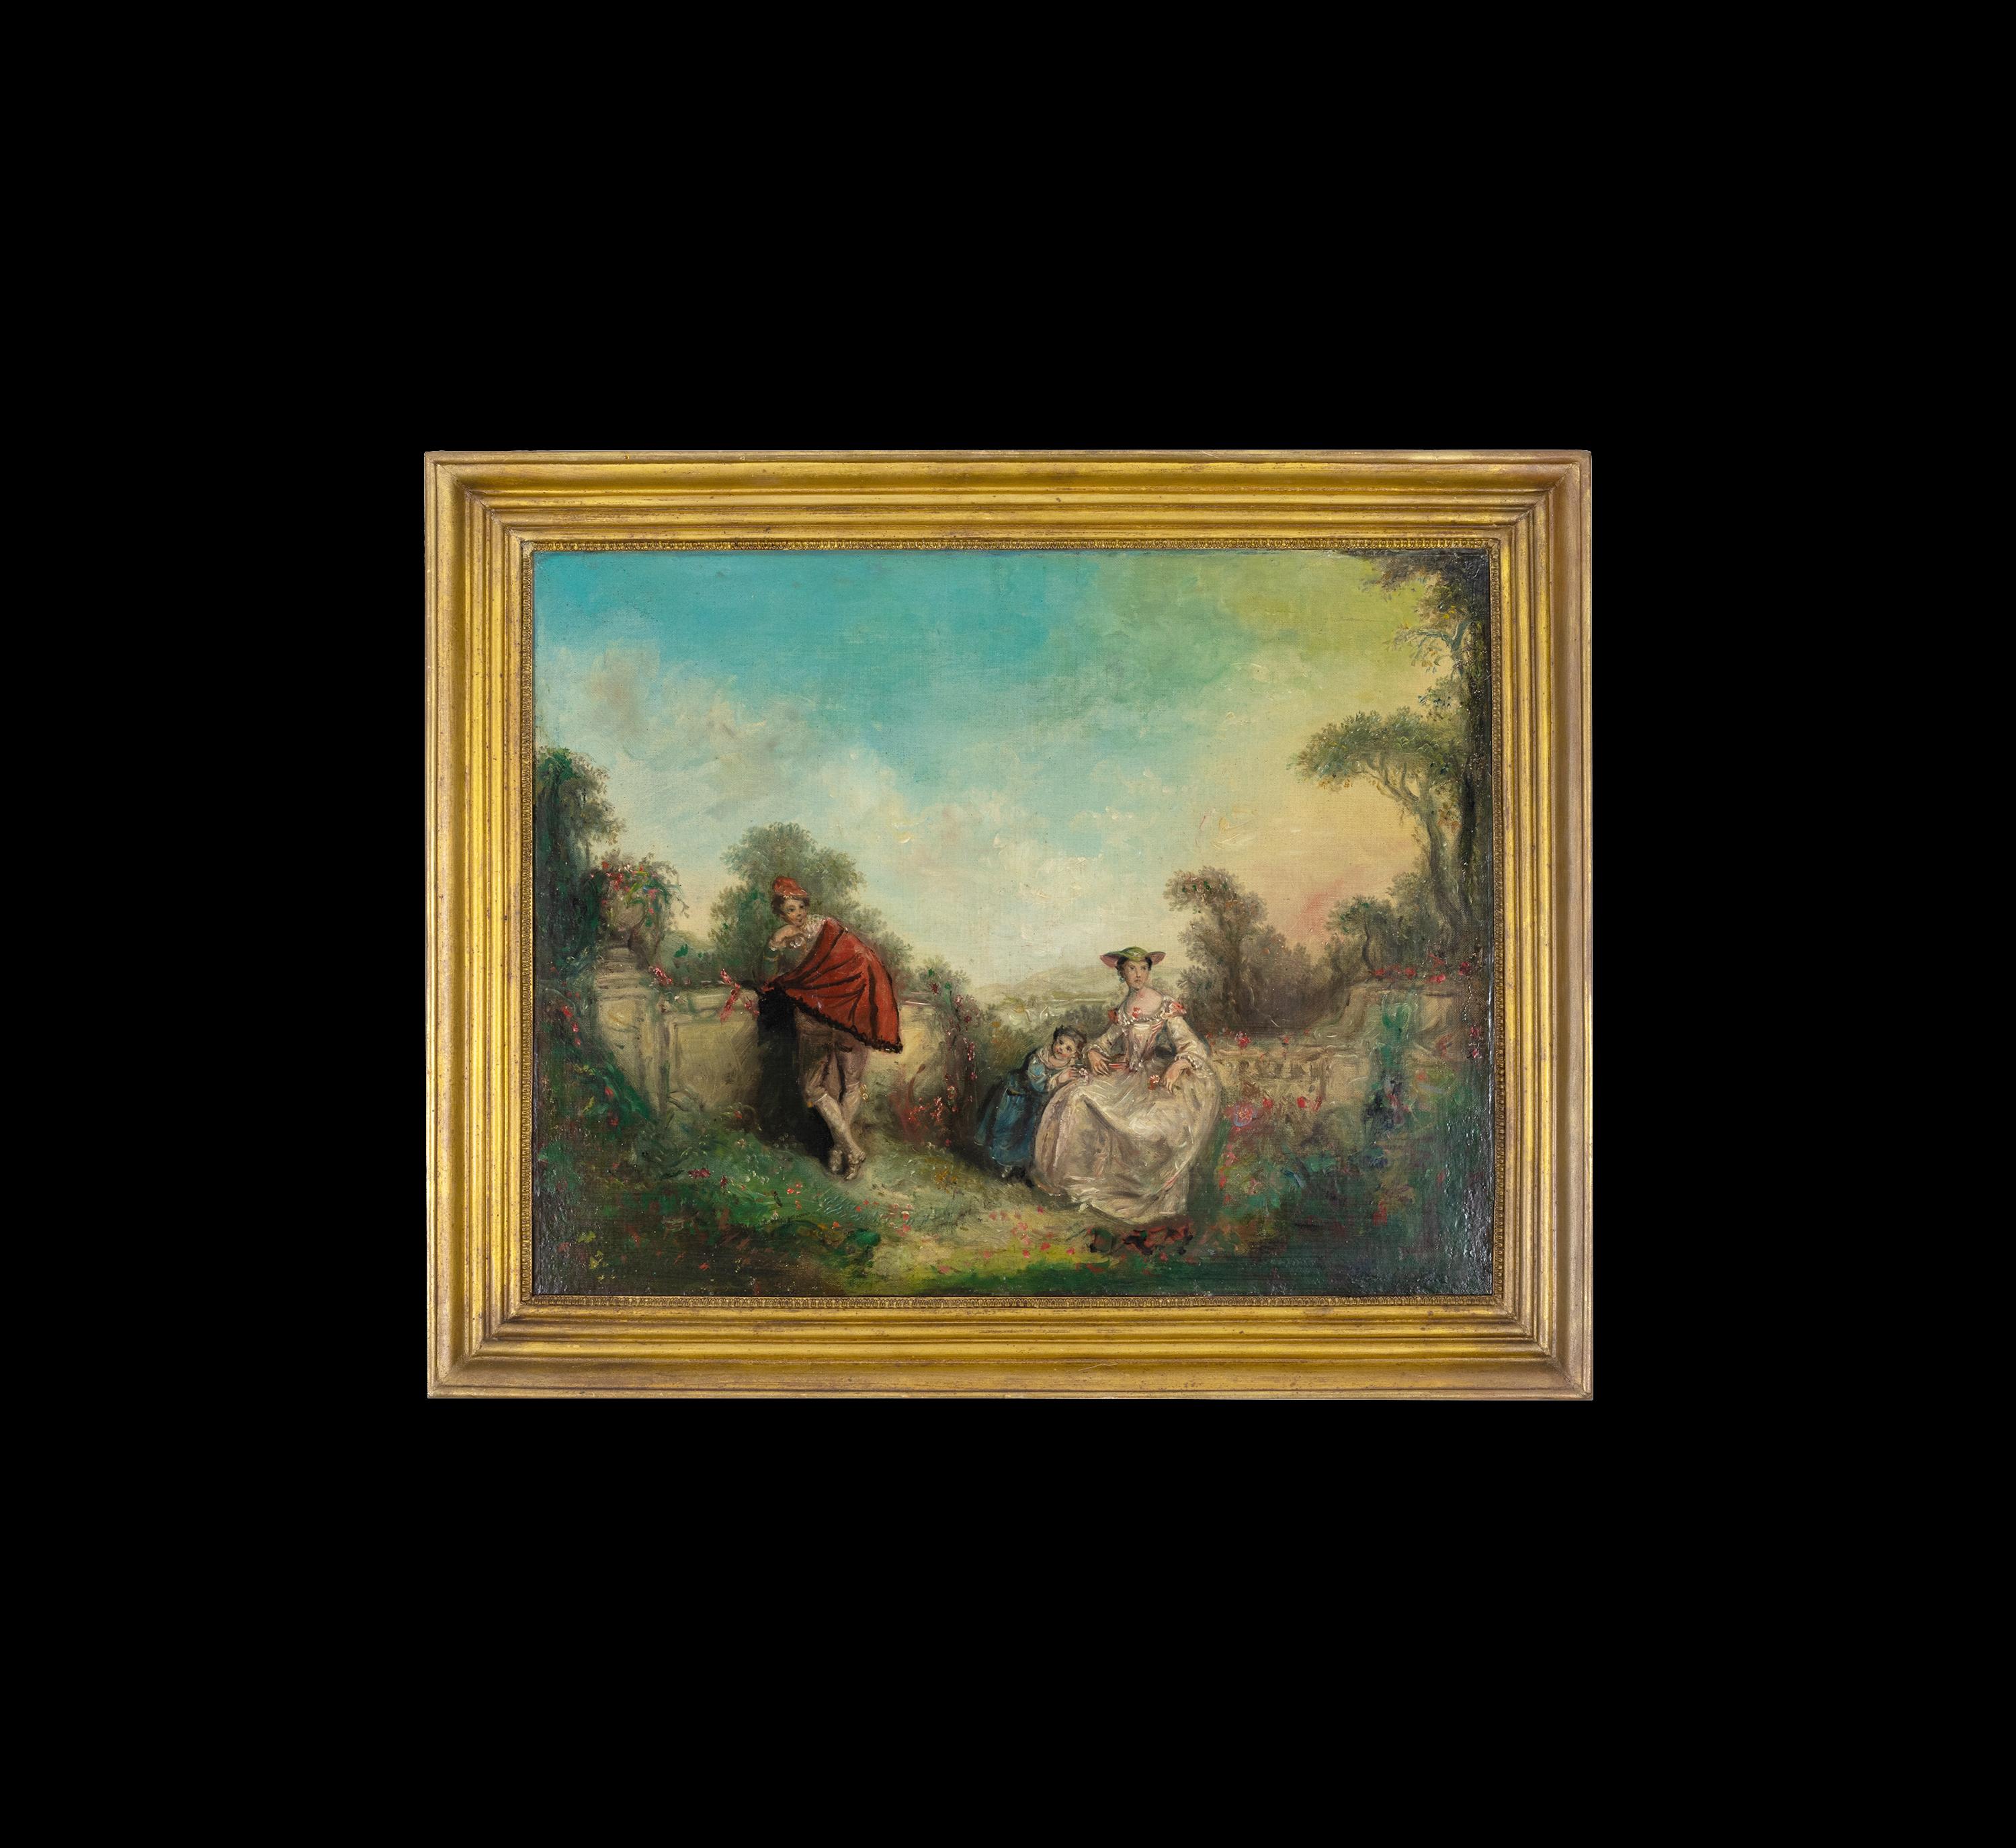 A romantic subject painting depicting a father leaning against a wall and a brooding mother and daughter, with lakes and mountains in the distance, Baroque inspiration.
Frame 76.5 x 62 cm 
Canvas 64 x 51 cm  
Dimensions: Frame 76.5 x 62 cm canvas 64